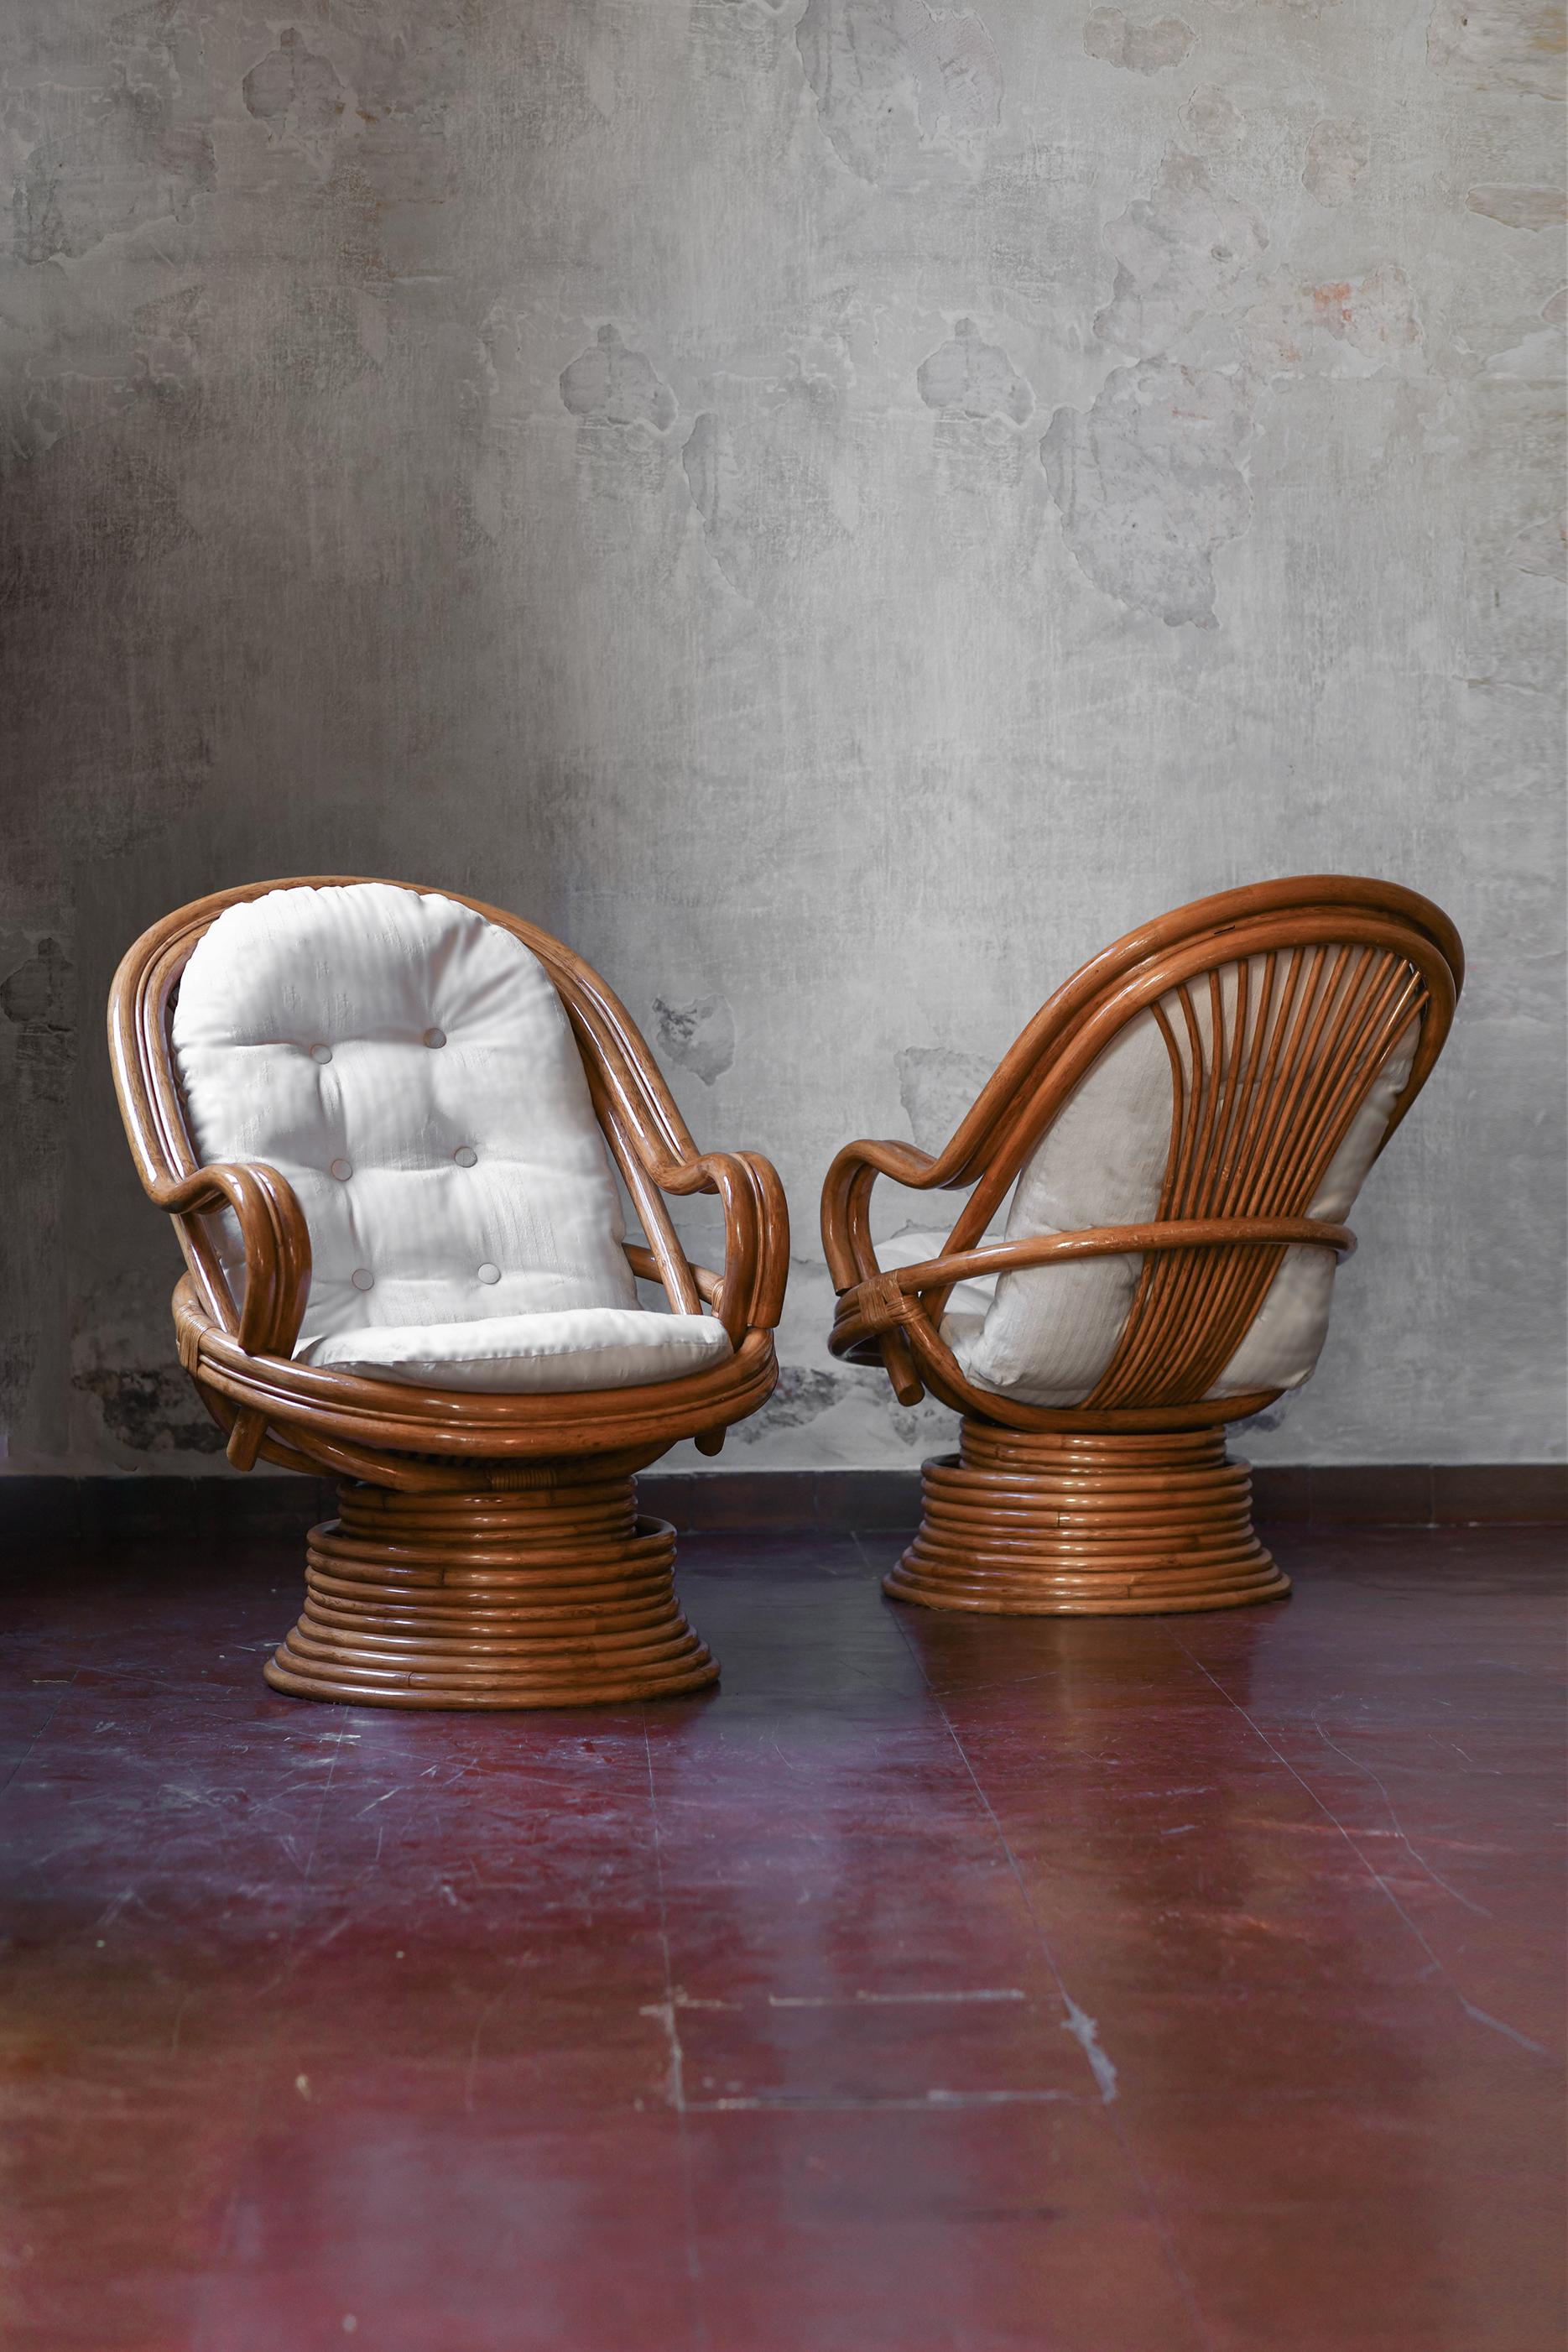 PAIR OF SWIVEL RATTAN ARMCHAIRS WITH CUSHIONS AND COFFEE TABLE, ITALY 1960
Product details
Armchair dimensions: 80 w x 110 h x 100 d cm
Table dimensions: 66 w x 50 h x 66 d cm
Complete with cushions